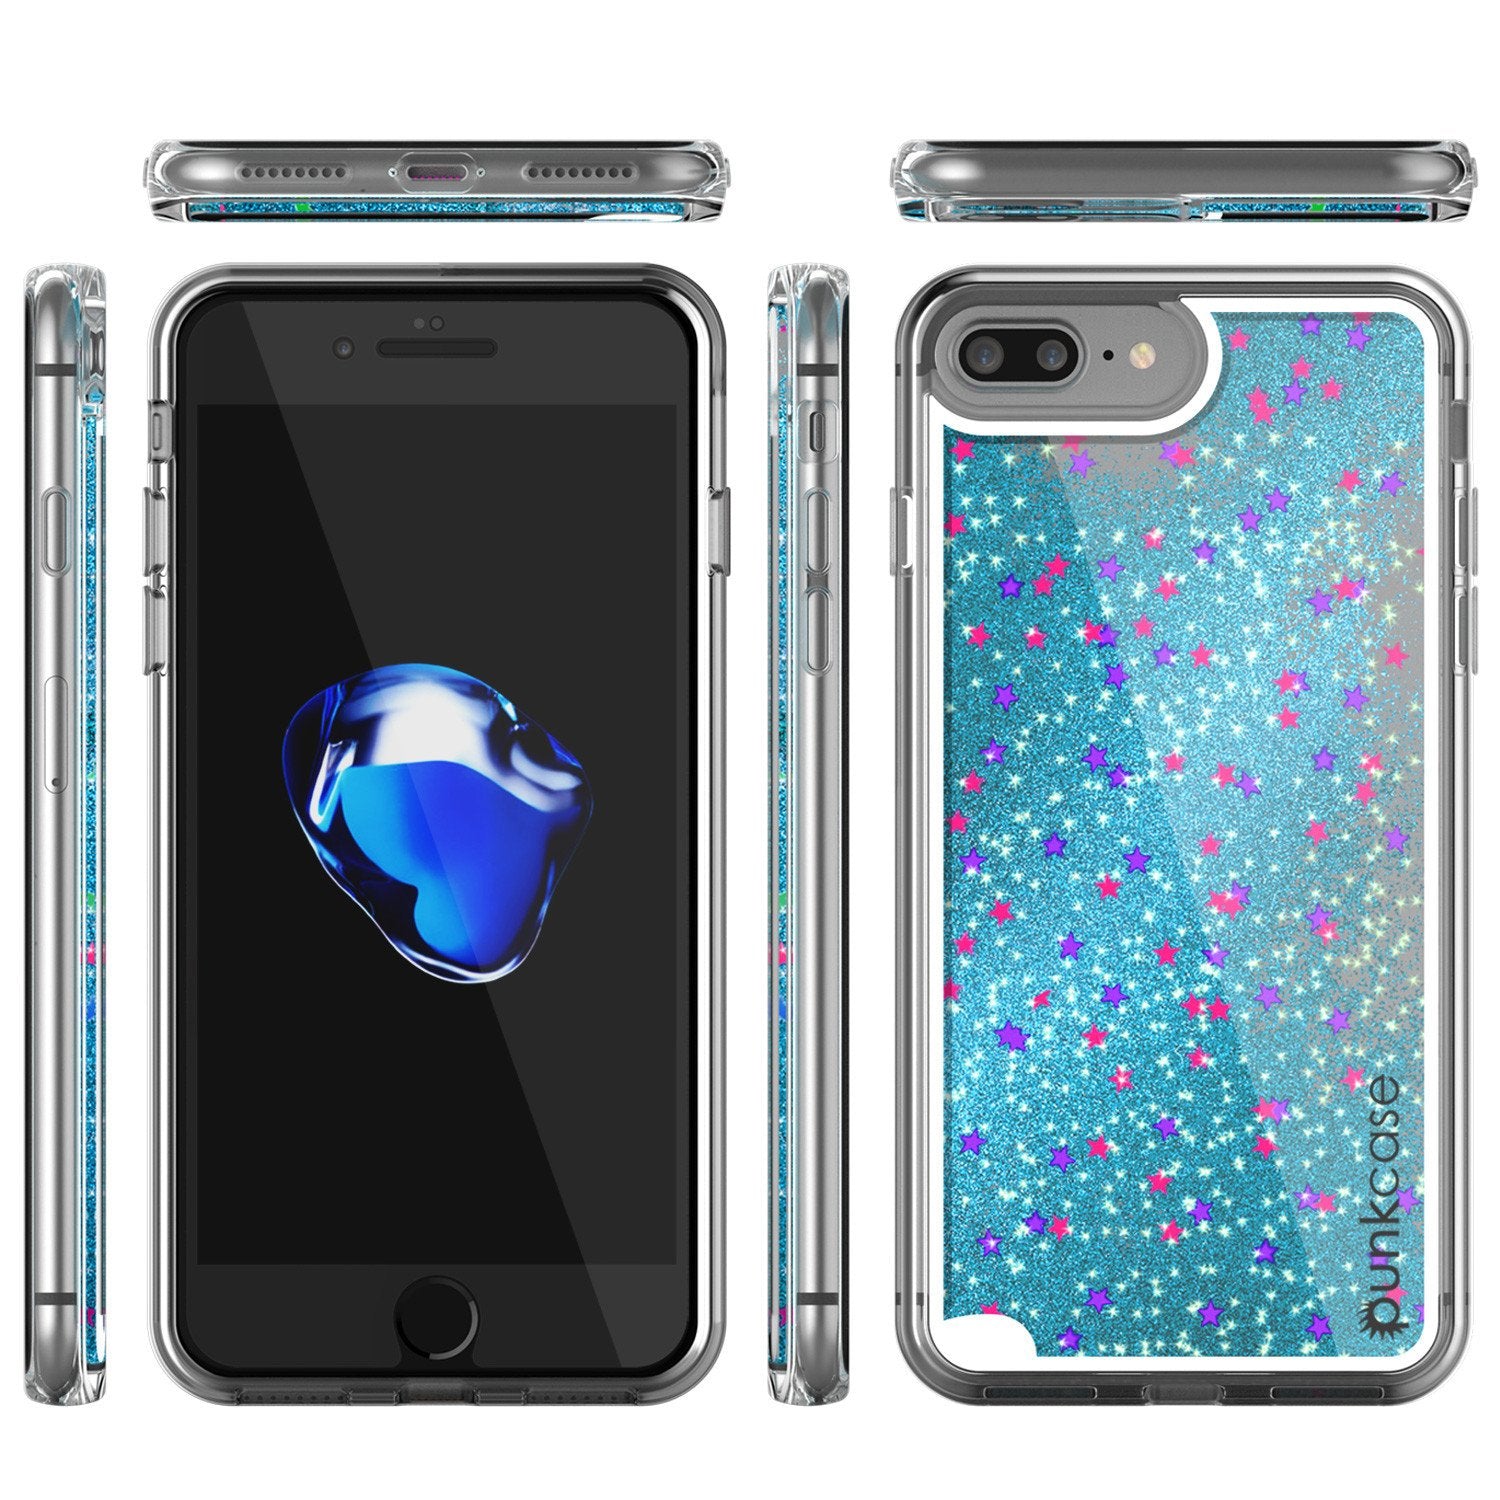 iPhone 7 Plus Case, Punkcase [Liquid Teal Series] Protective Dual Layer Floating Glitter Cover with lots of Bling & Sparkle + 0.3mm Tempered Glass Screen Protector for Apple iPhone 7s Plus